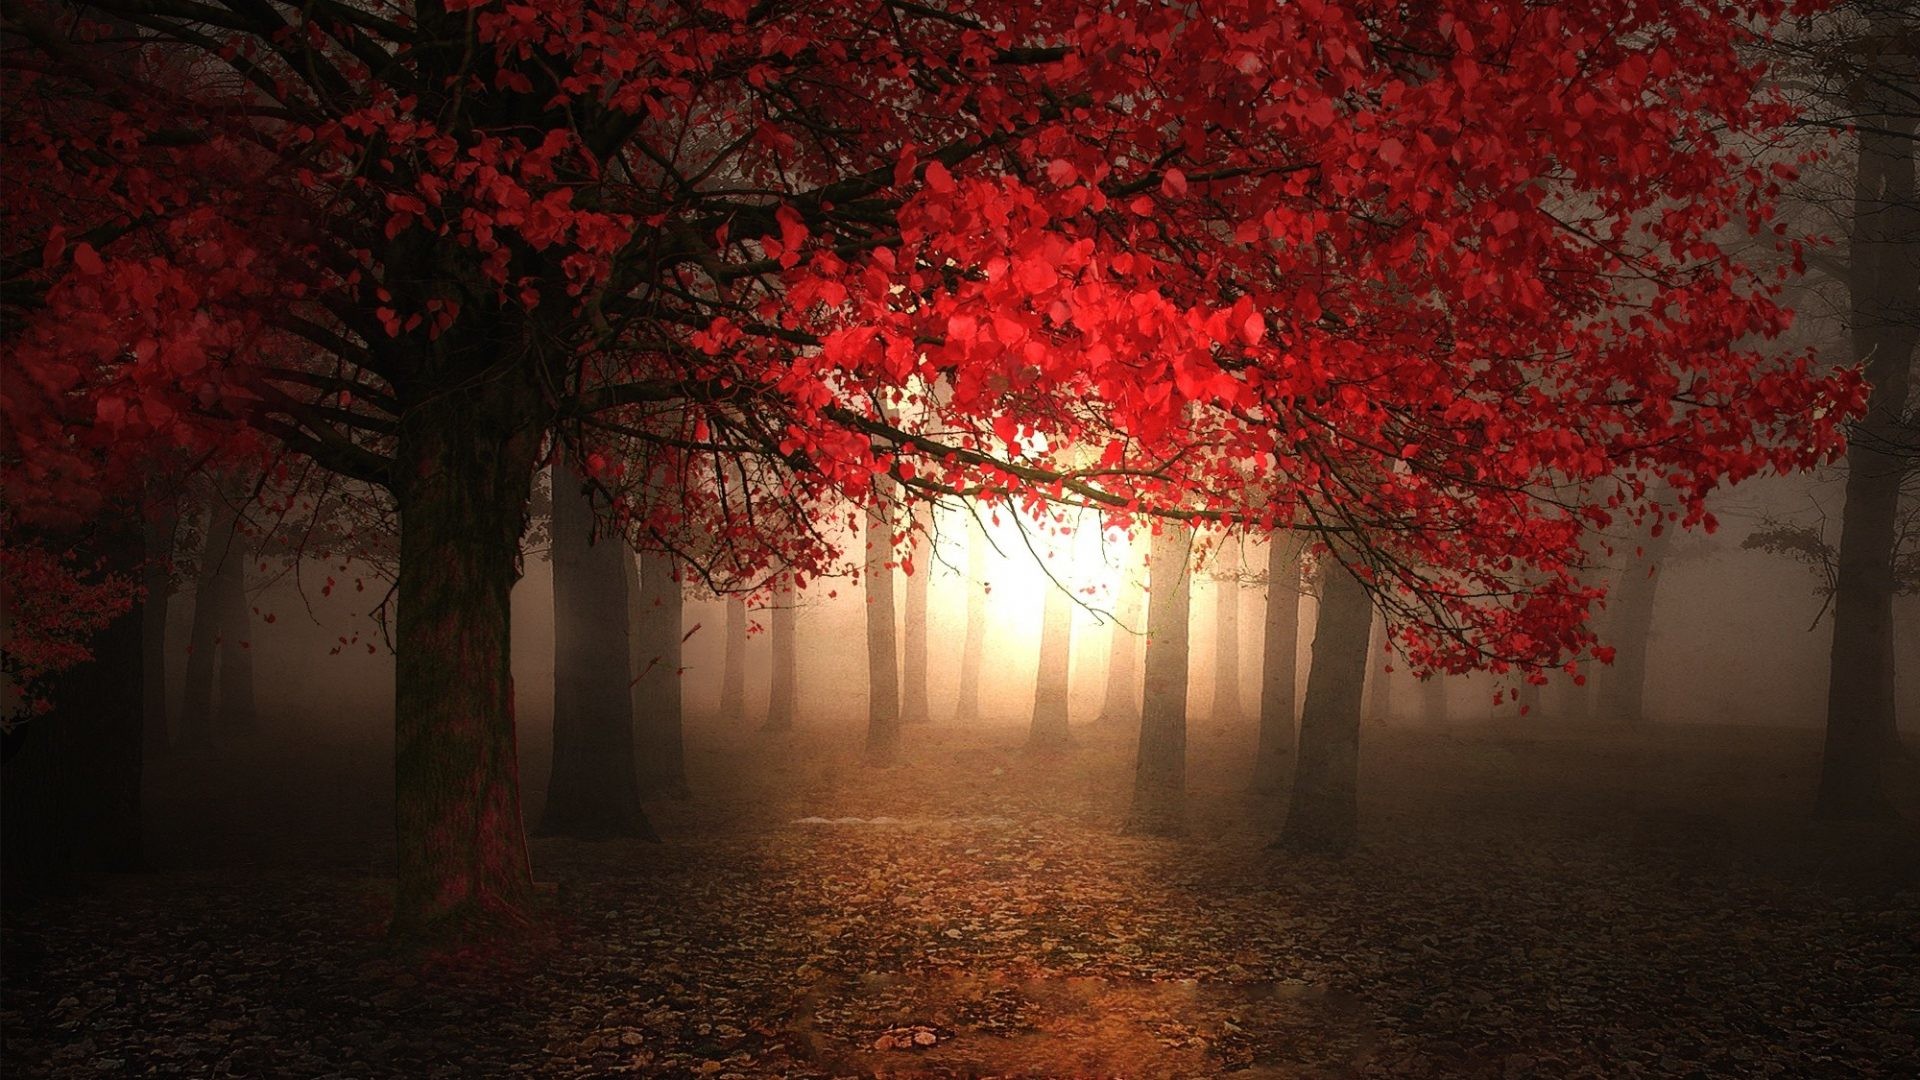 1920x1080 Red Tag - Season Magic Forest Trees Autumn Foggy Light Morning Red  Beautiful Leaves Fall Wallpaper